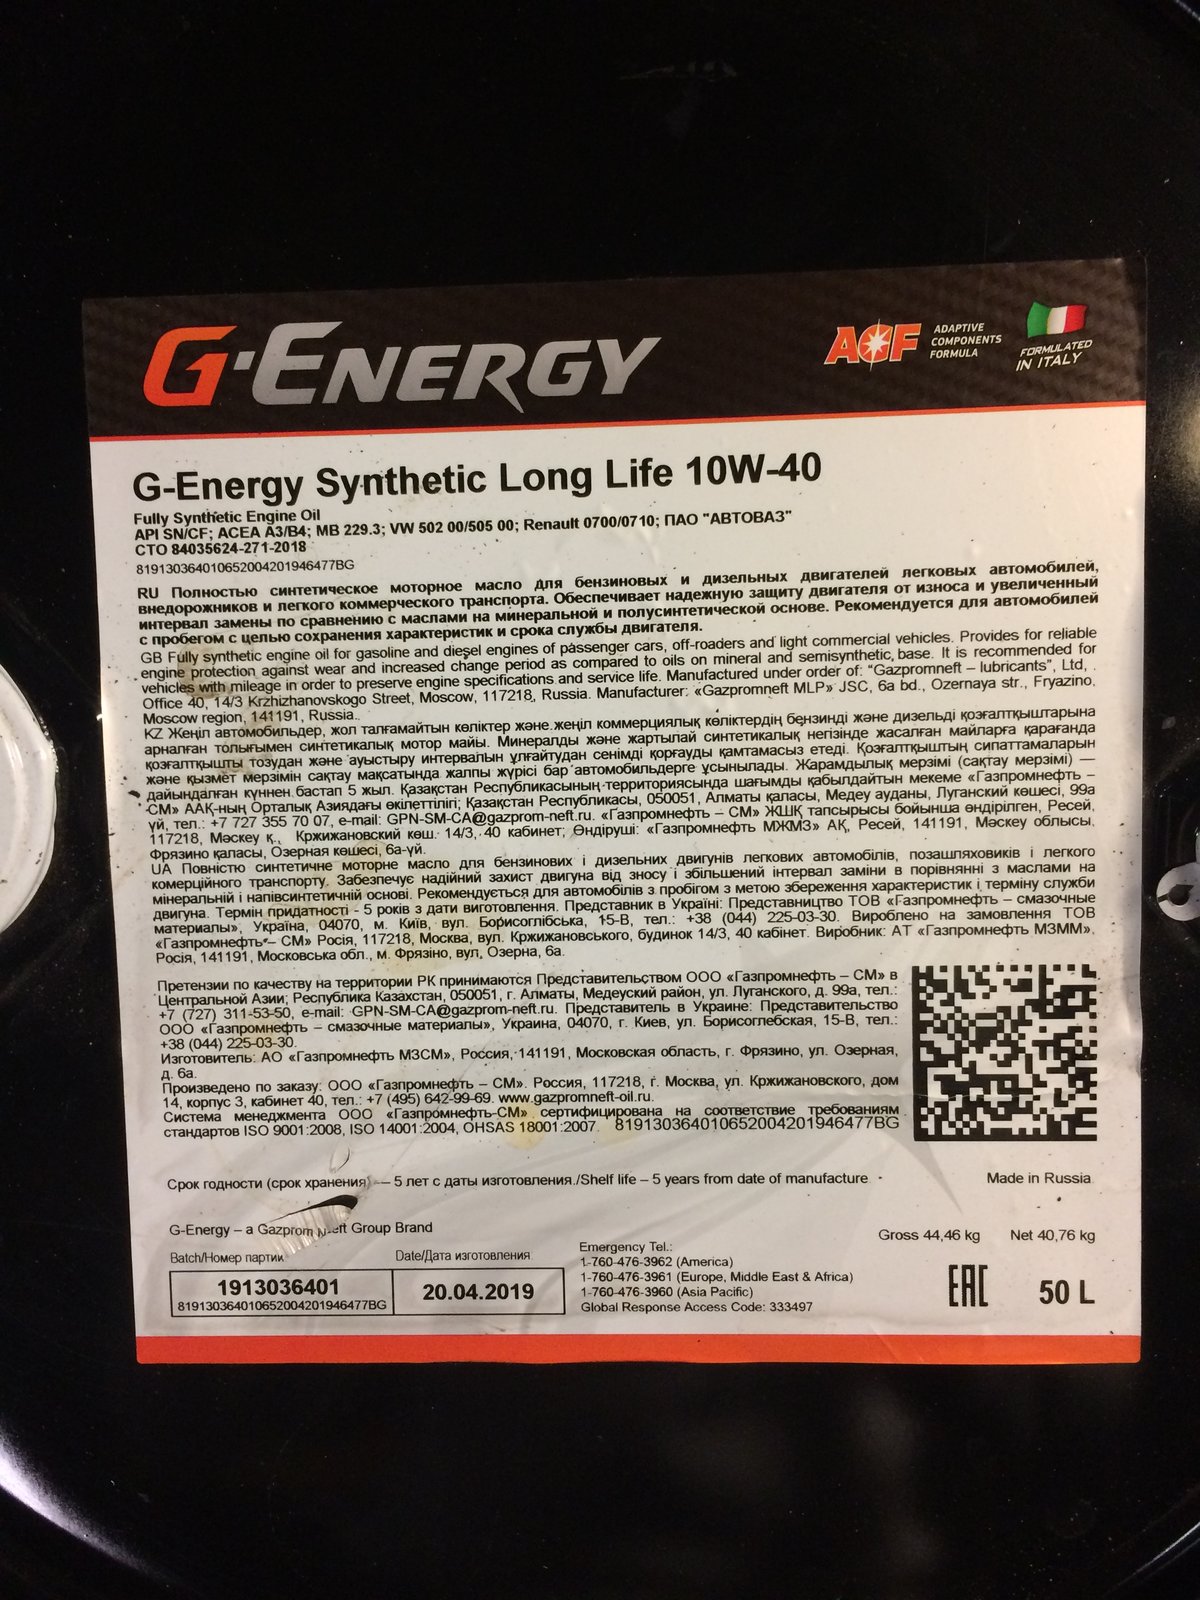 Synthetic long life. G Energy 10w 40 long Life. G Energy Synthetic 10w 40 long Life 1l. G-Energy Synthetic long Life 10w-40 API SN/CF, ACEA a3/b4 (205 л). G Energy 10w 40 Full Synthetic.